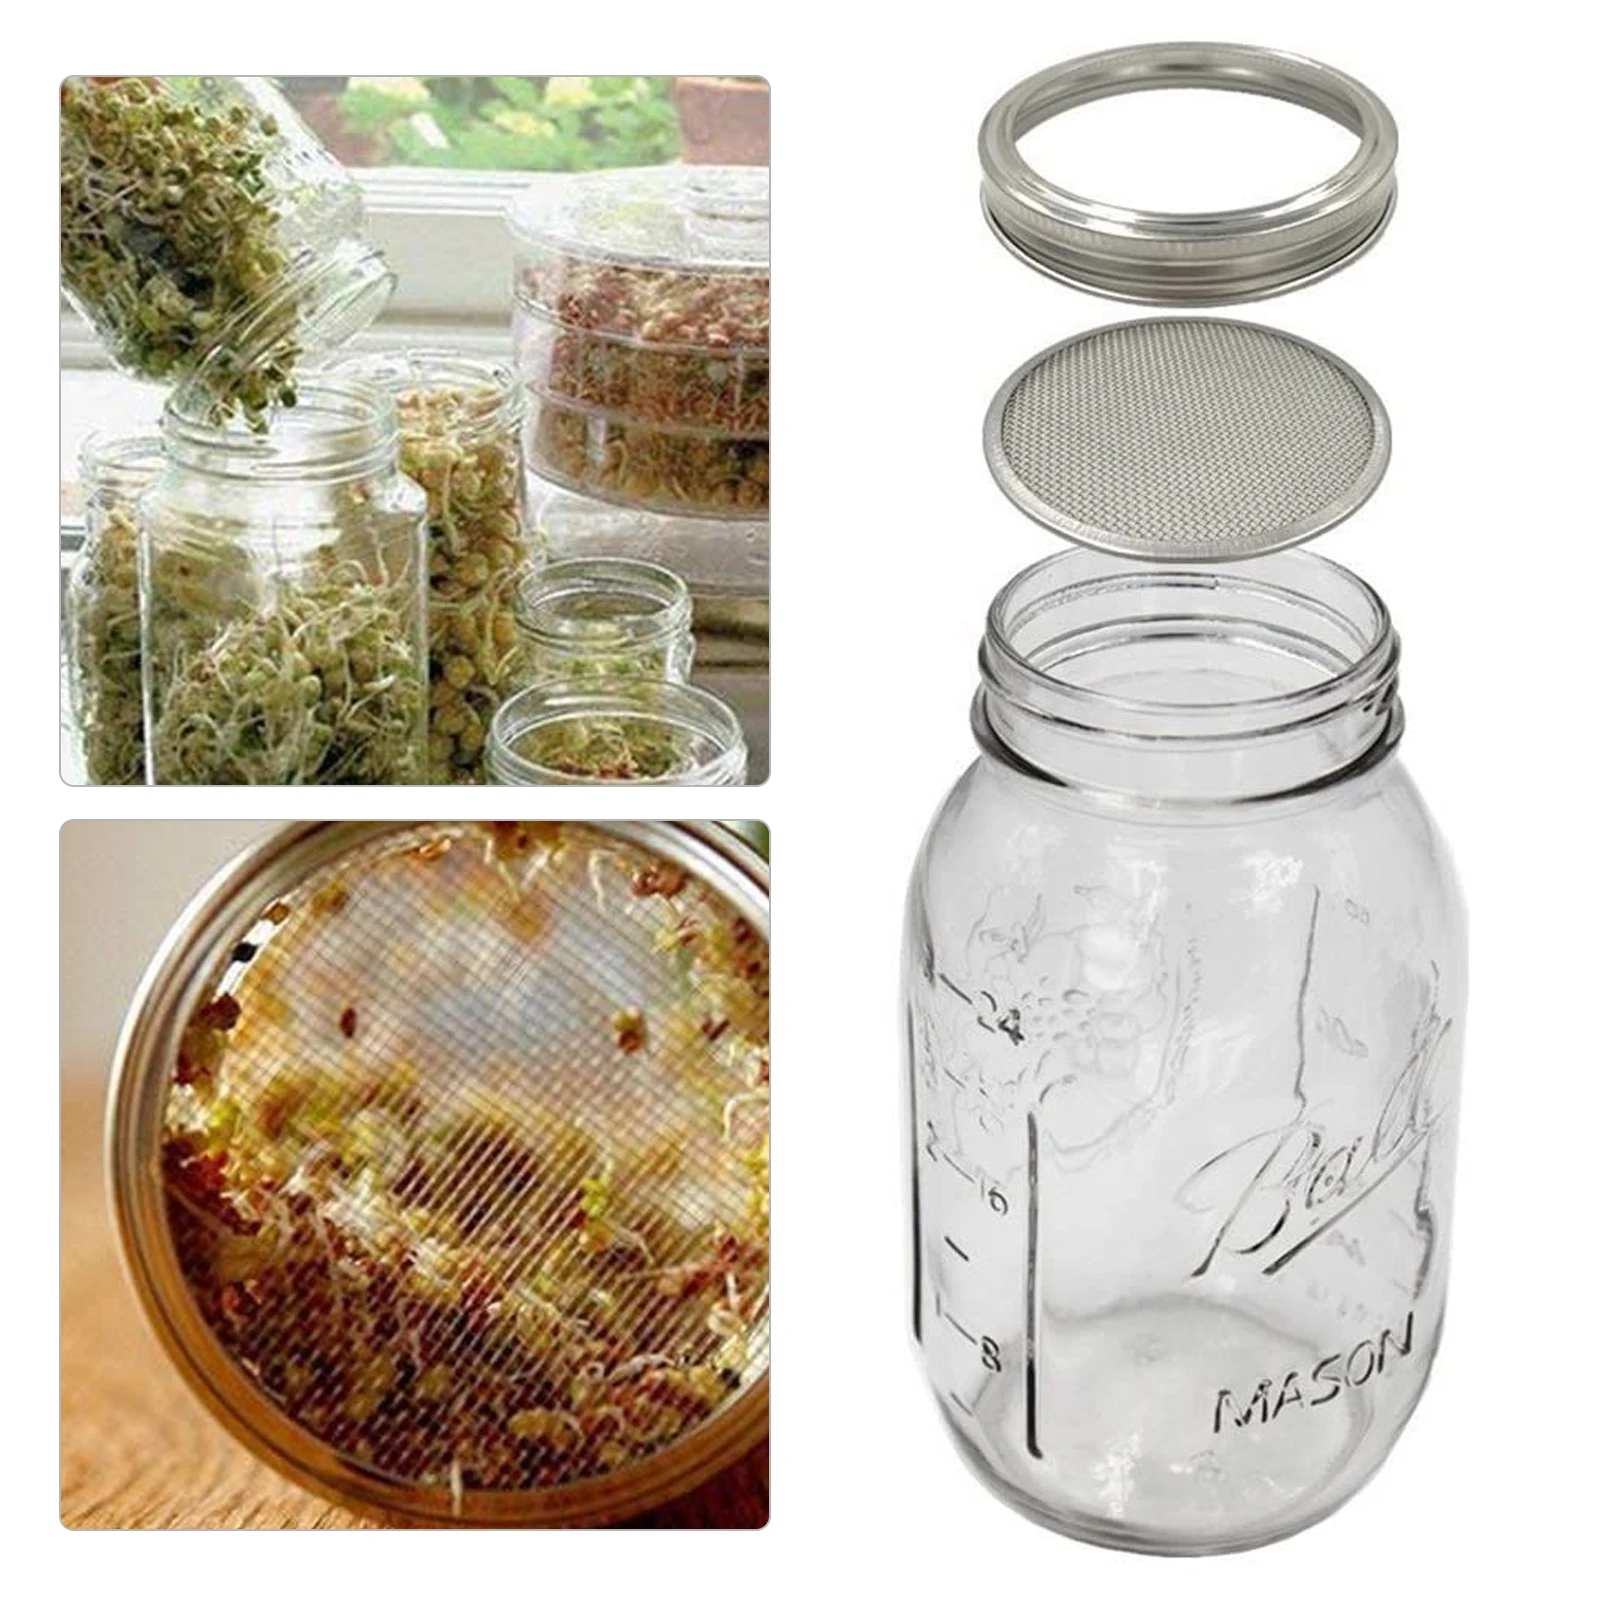 Jar Sprouting Lids, Wide Mouth Mason Sprout Jar Lids Kit For Making Organic Bean Sprout Seeds